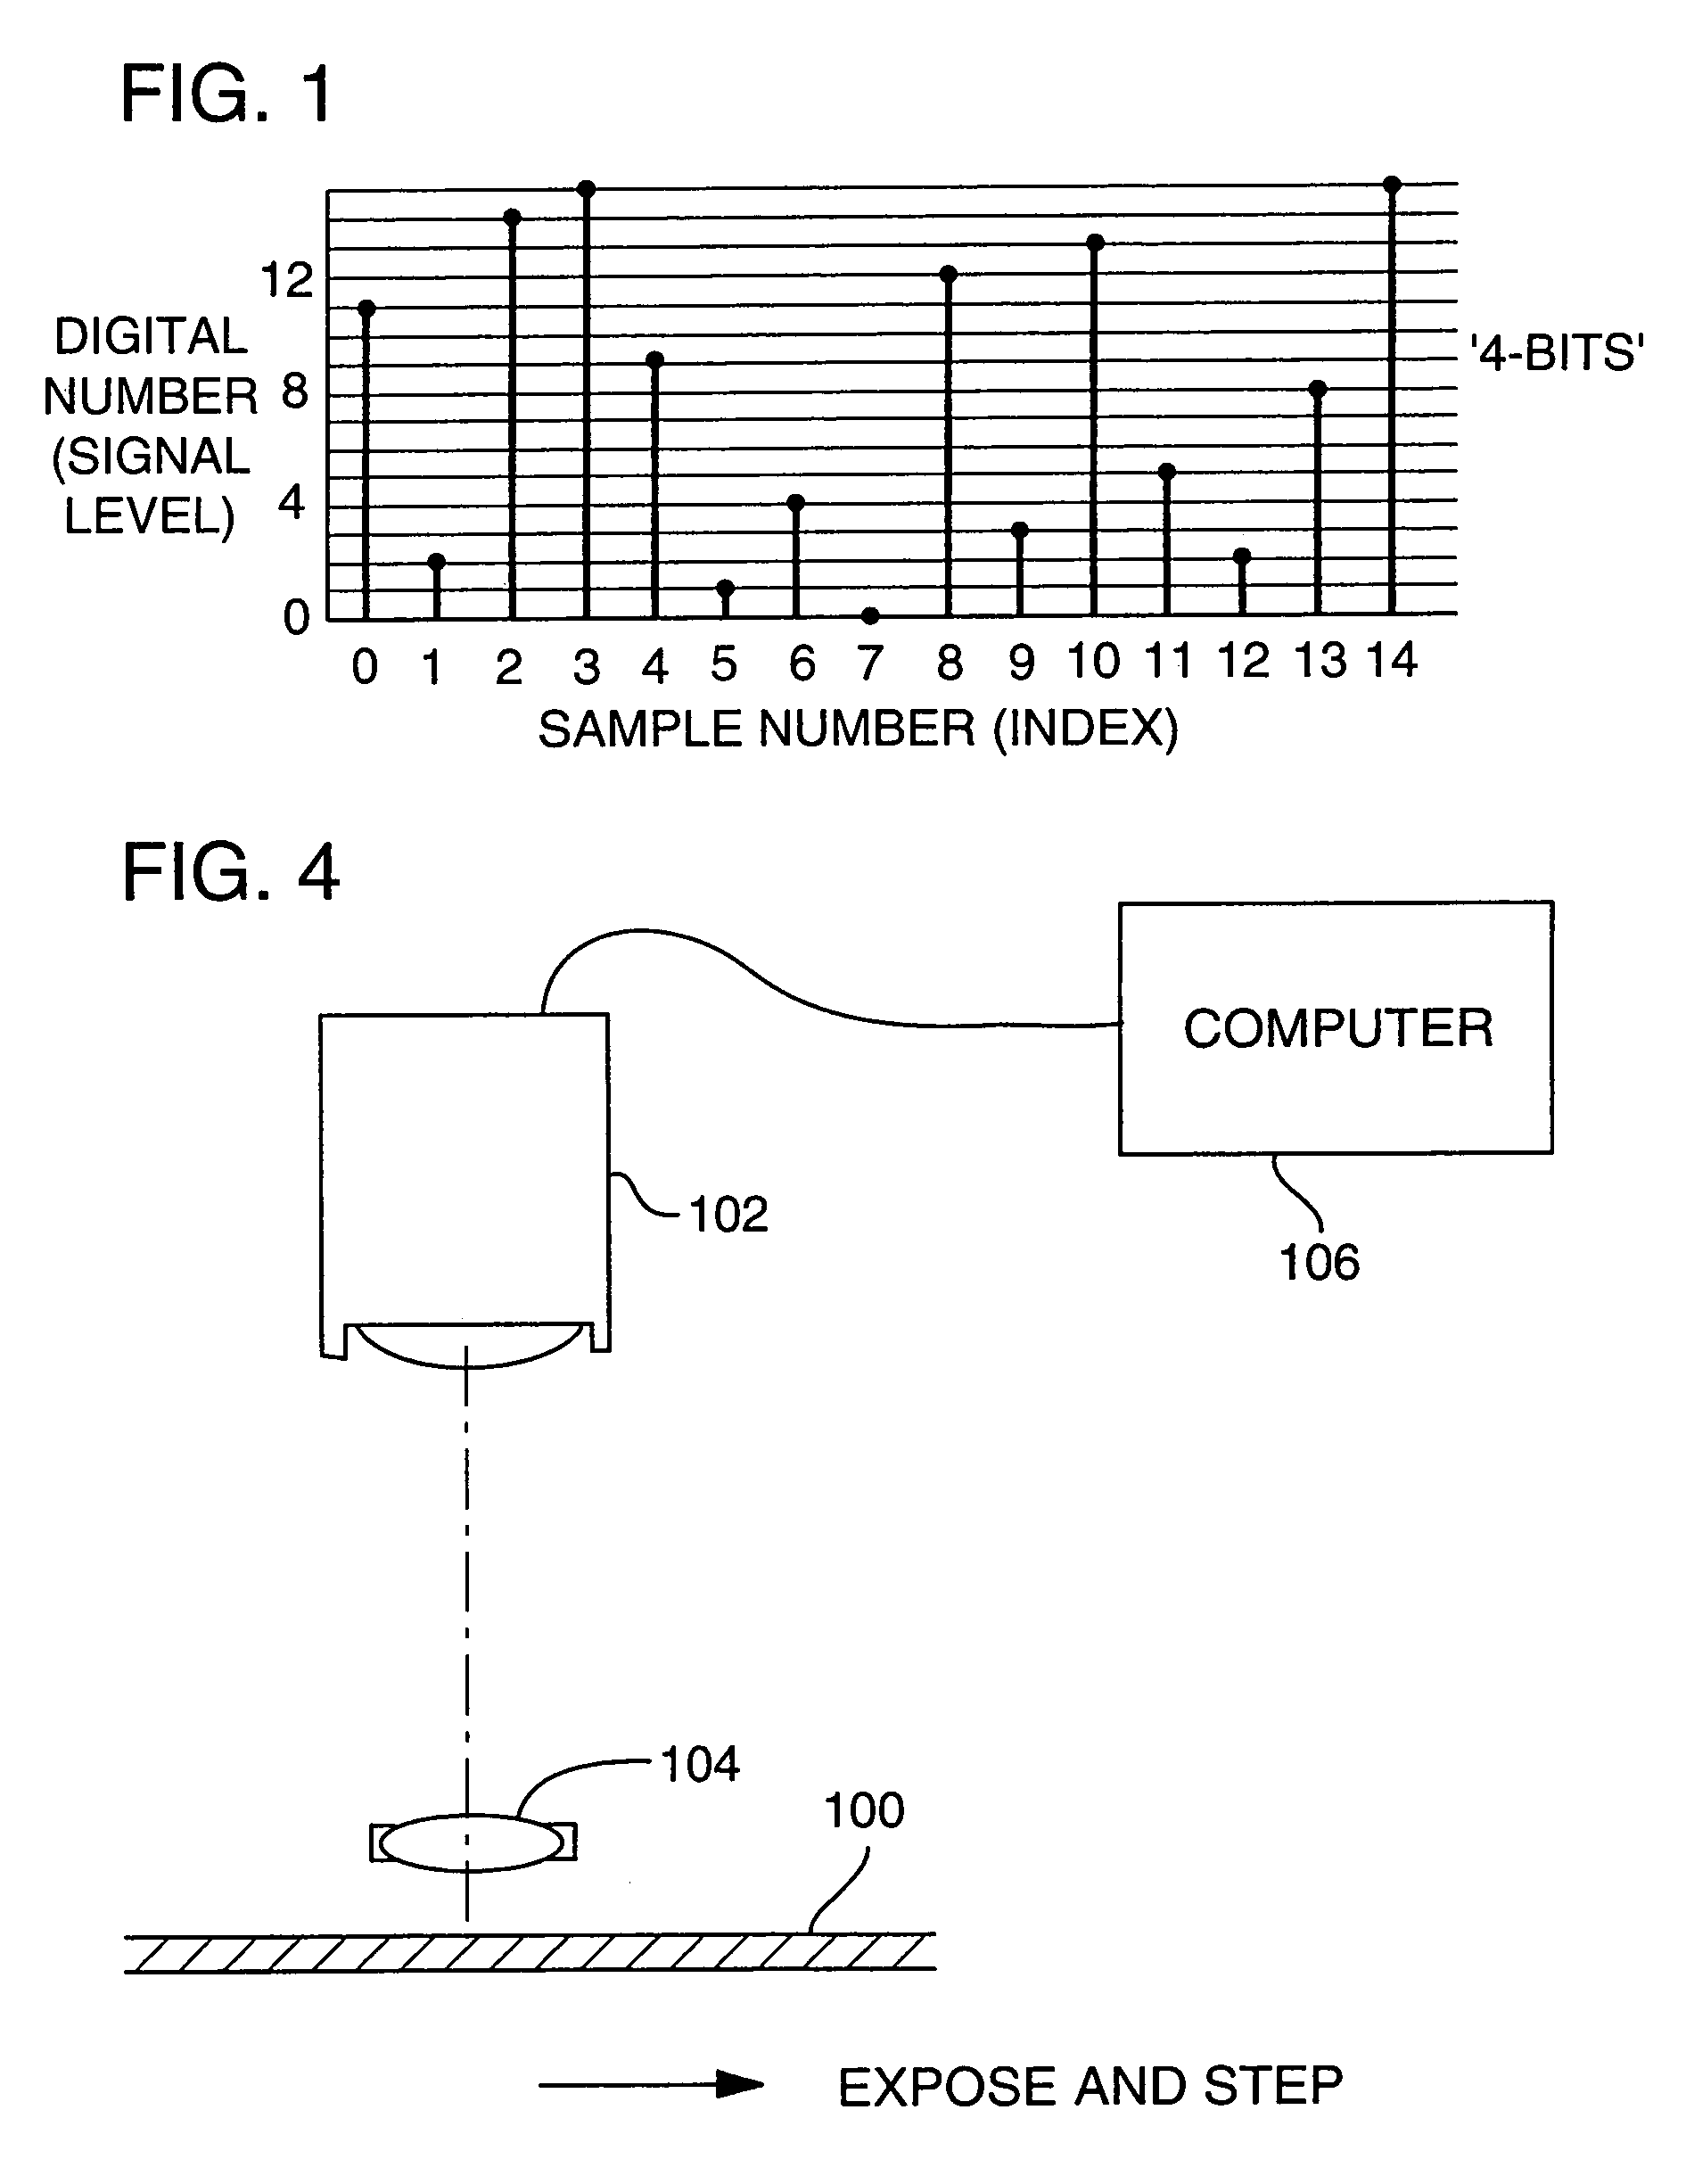 Methods for audio watermarking and decoding